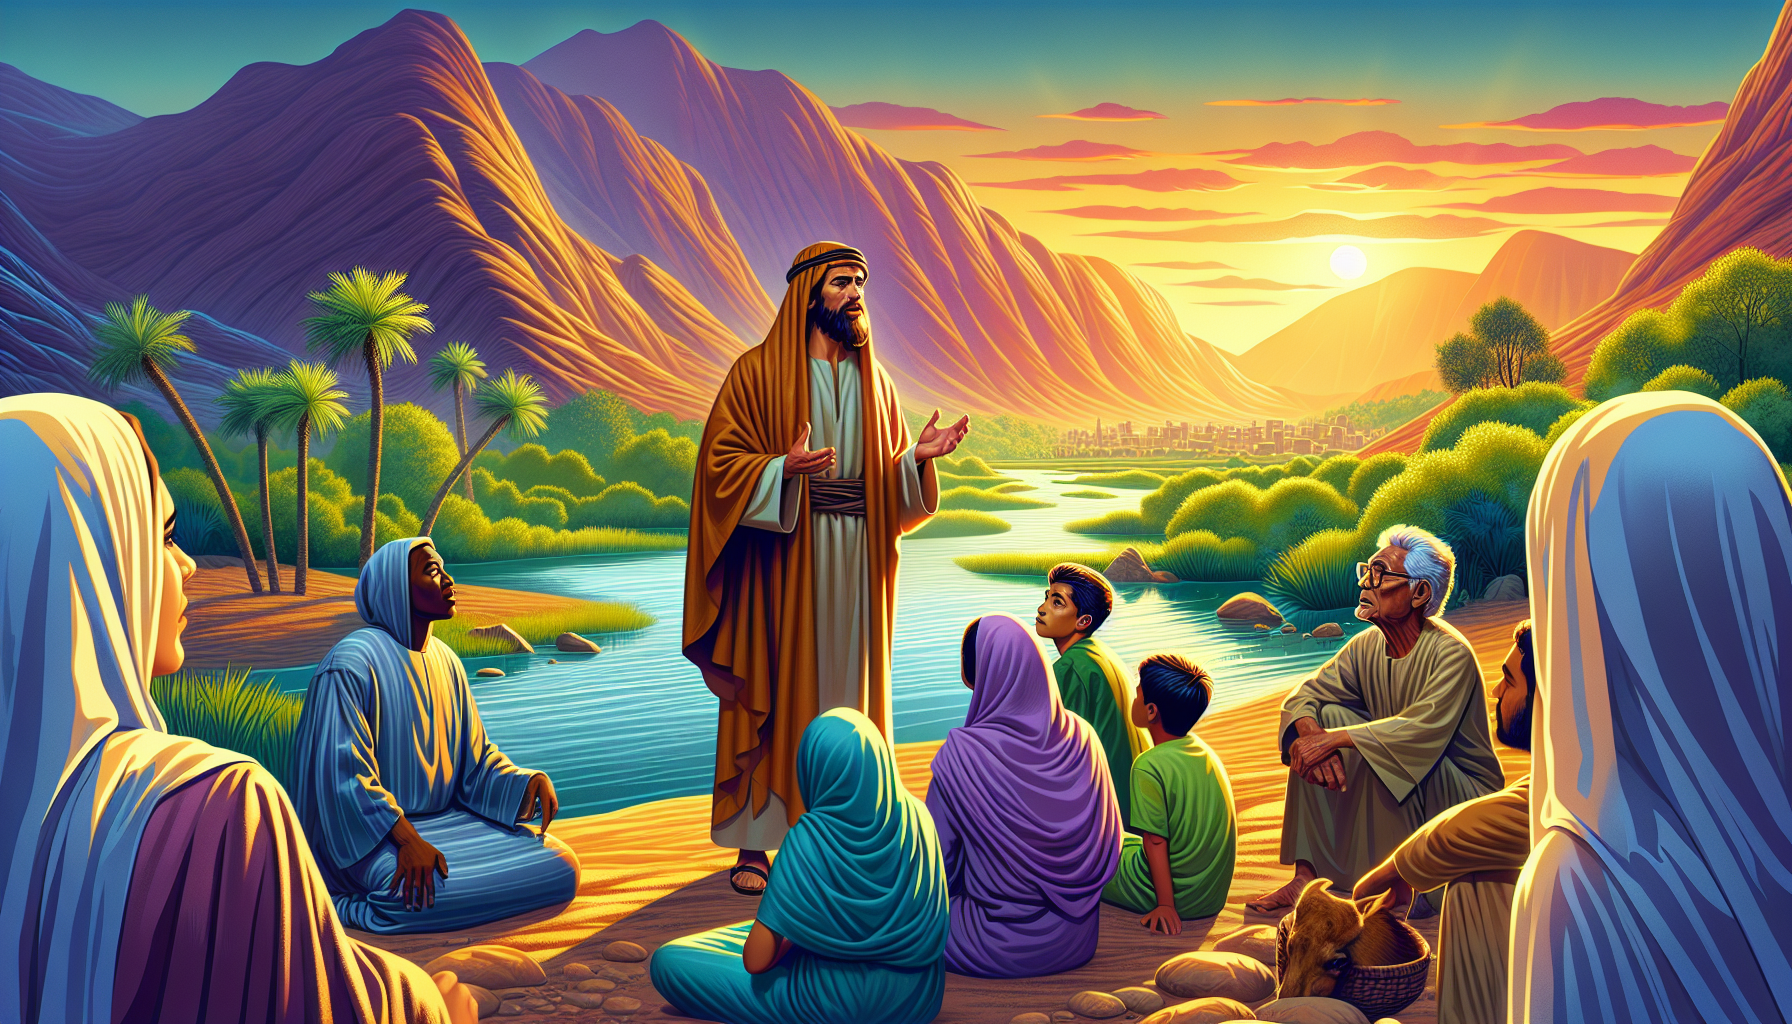 Artistic rendition of Saint John the Baptist in a serene desert landscape, wearing camel skin and preaching to a small, diverse group of attentive listeners, with a river and lush trees in the backgro